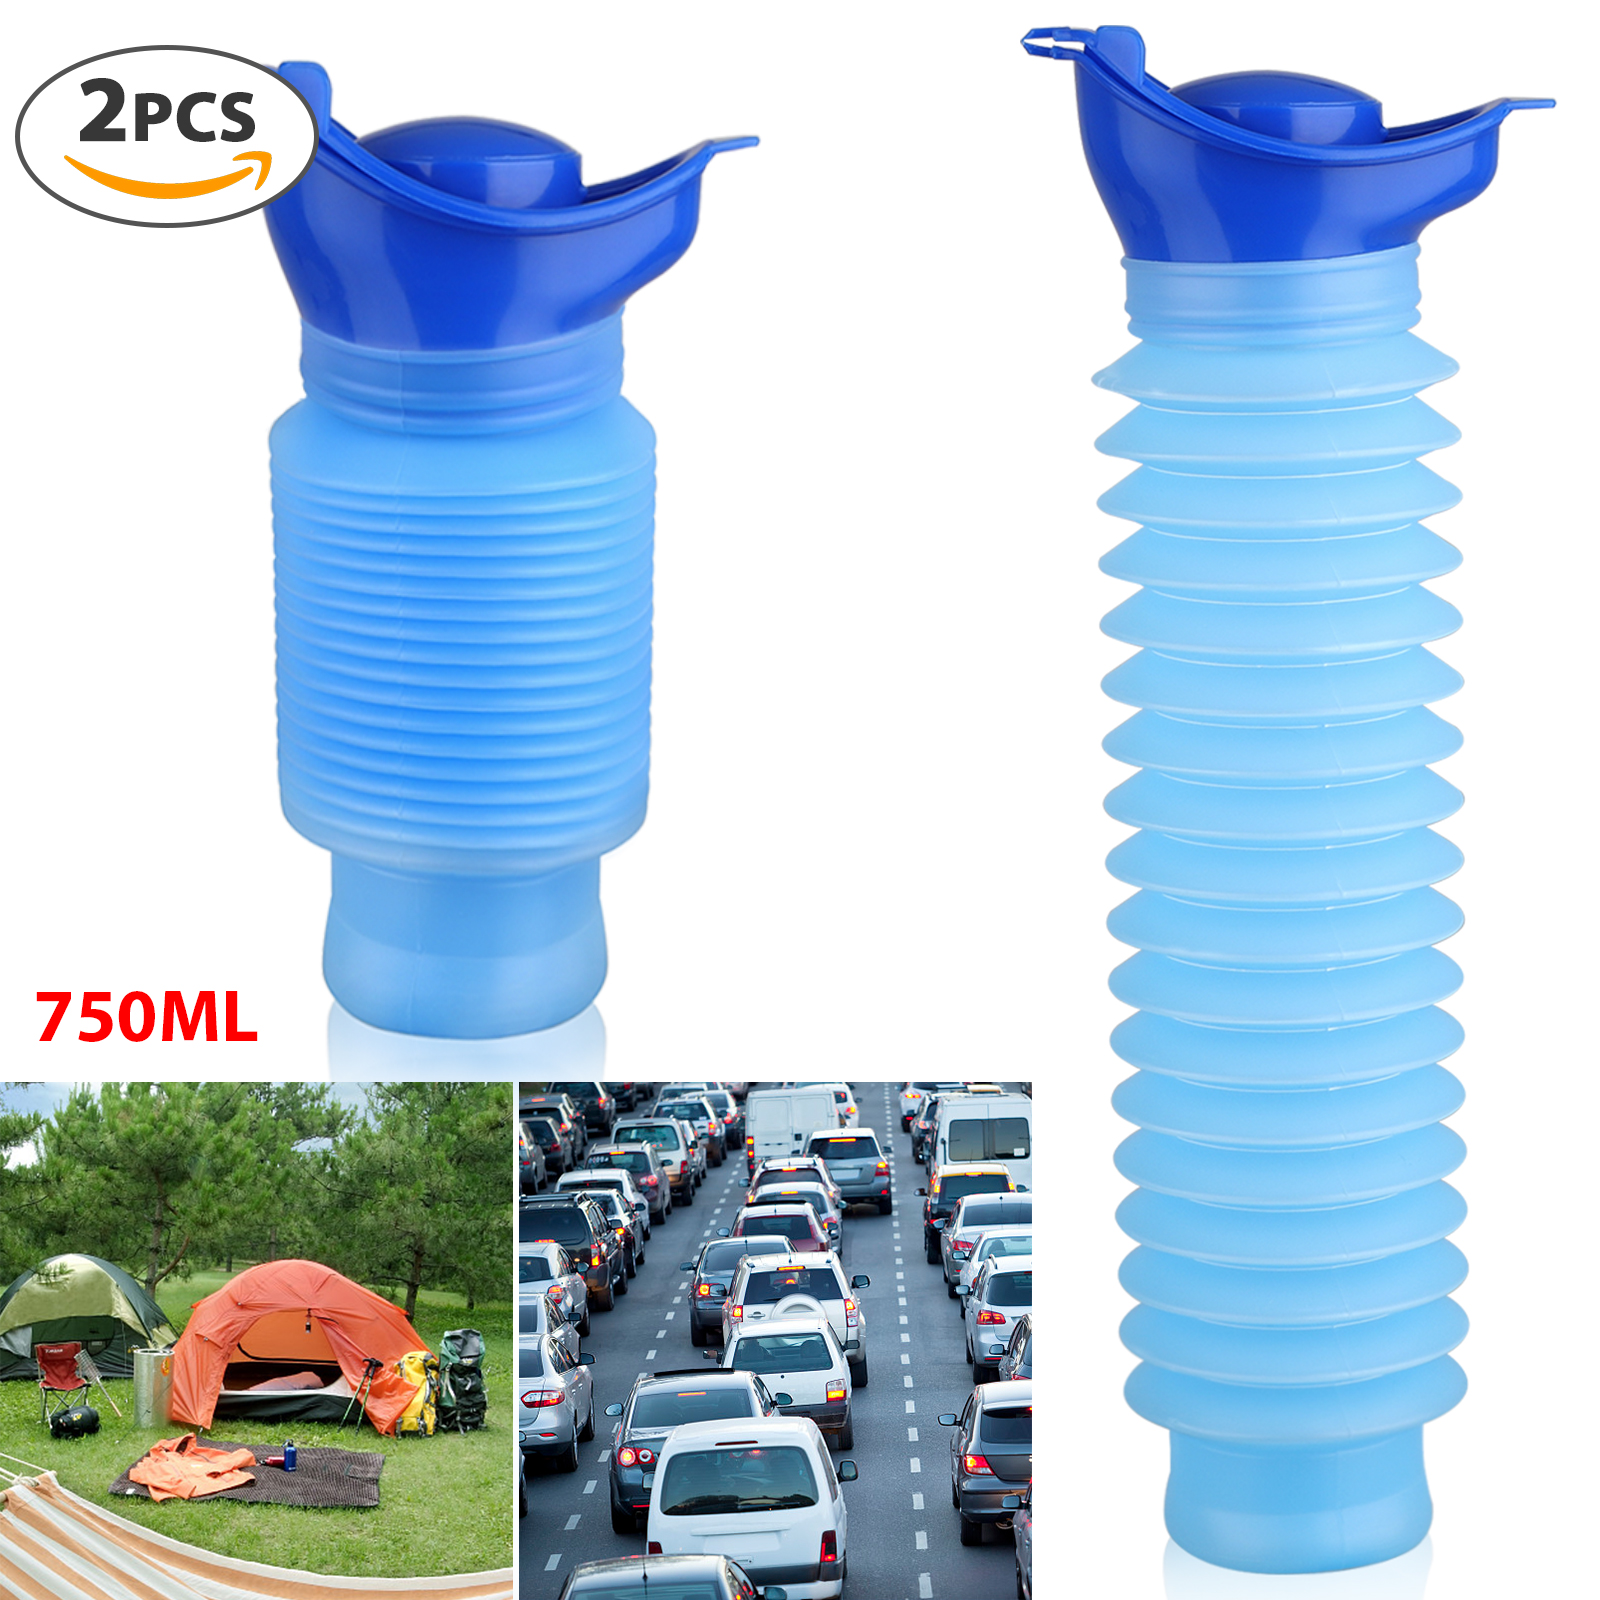 Male Female Portable Urinal Travel Camping Car Toilet Pee